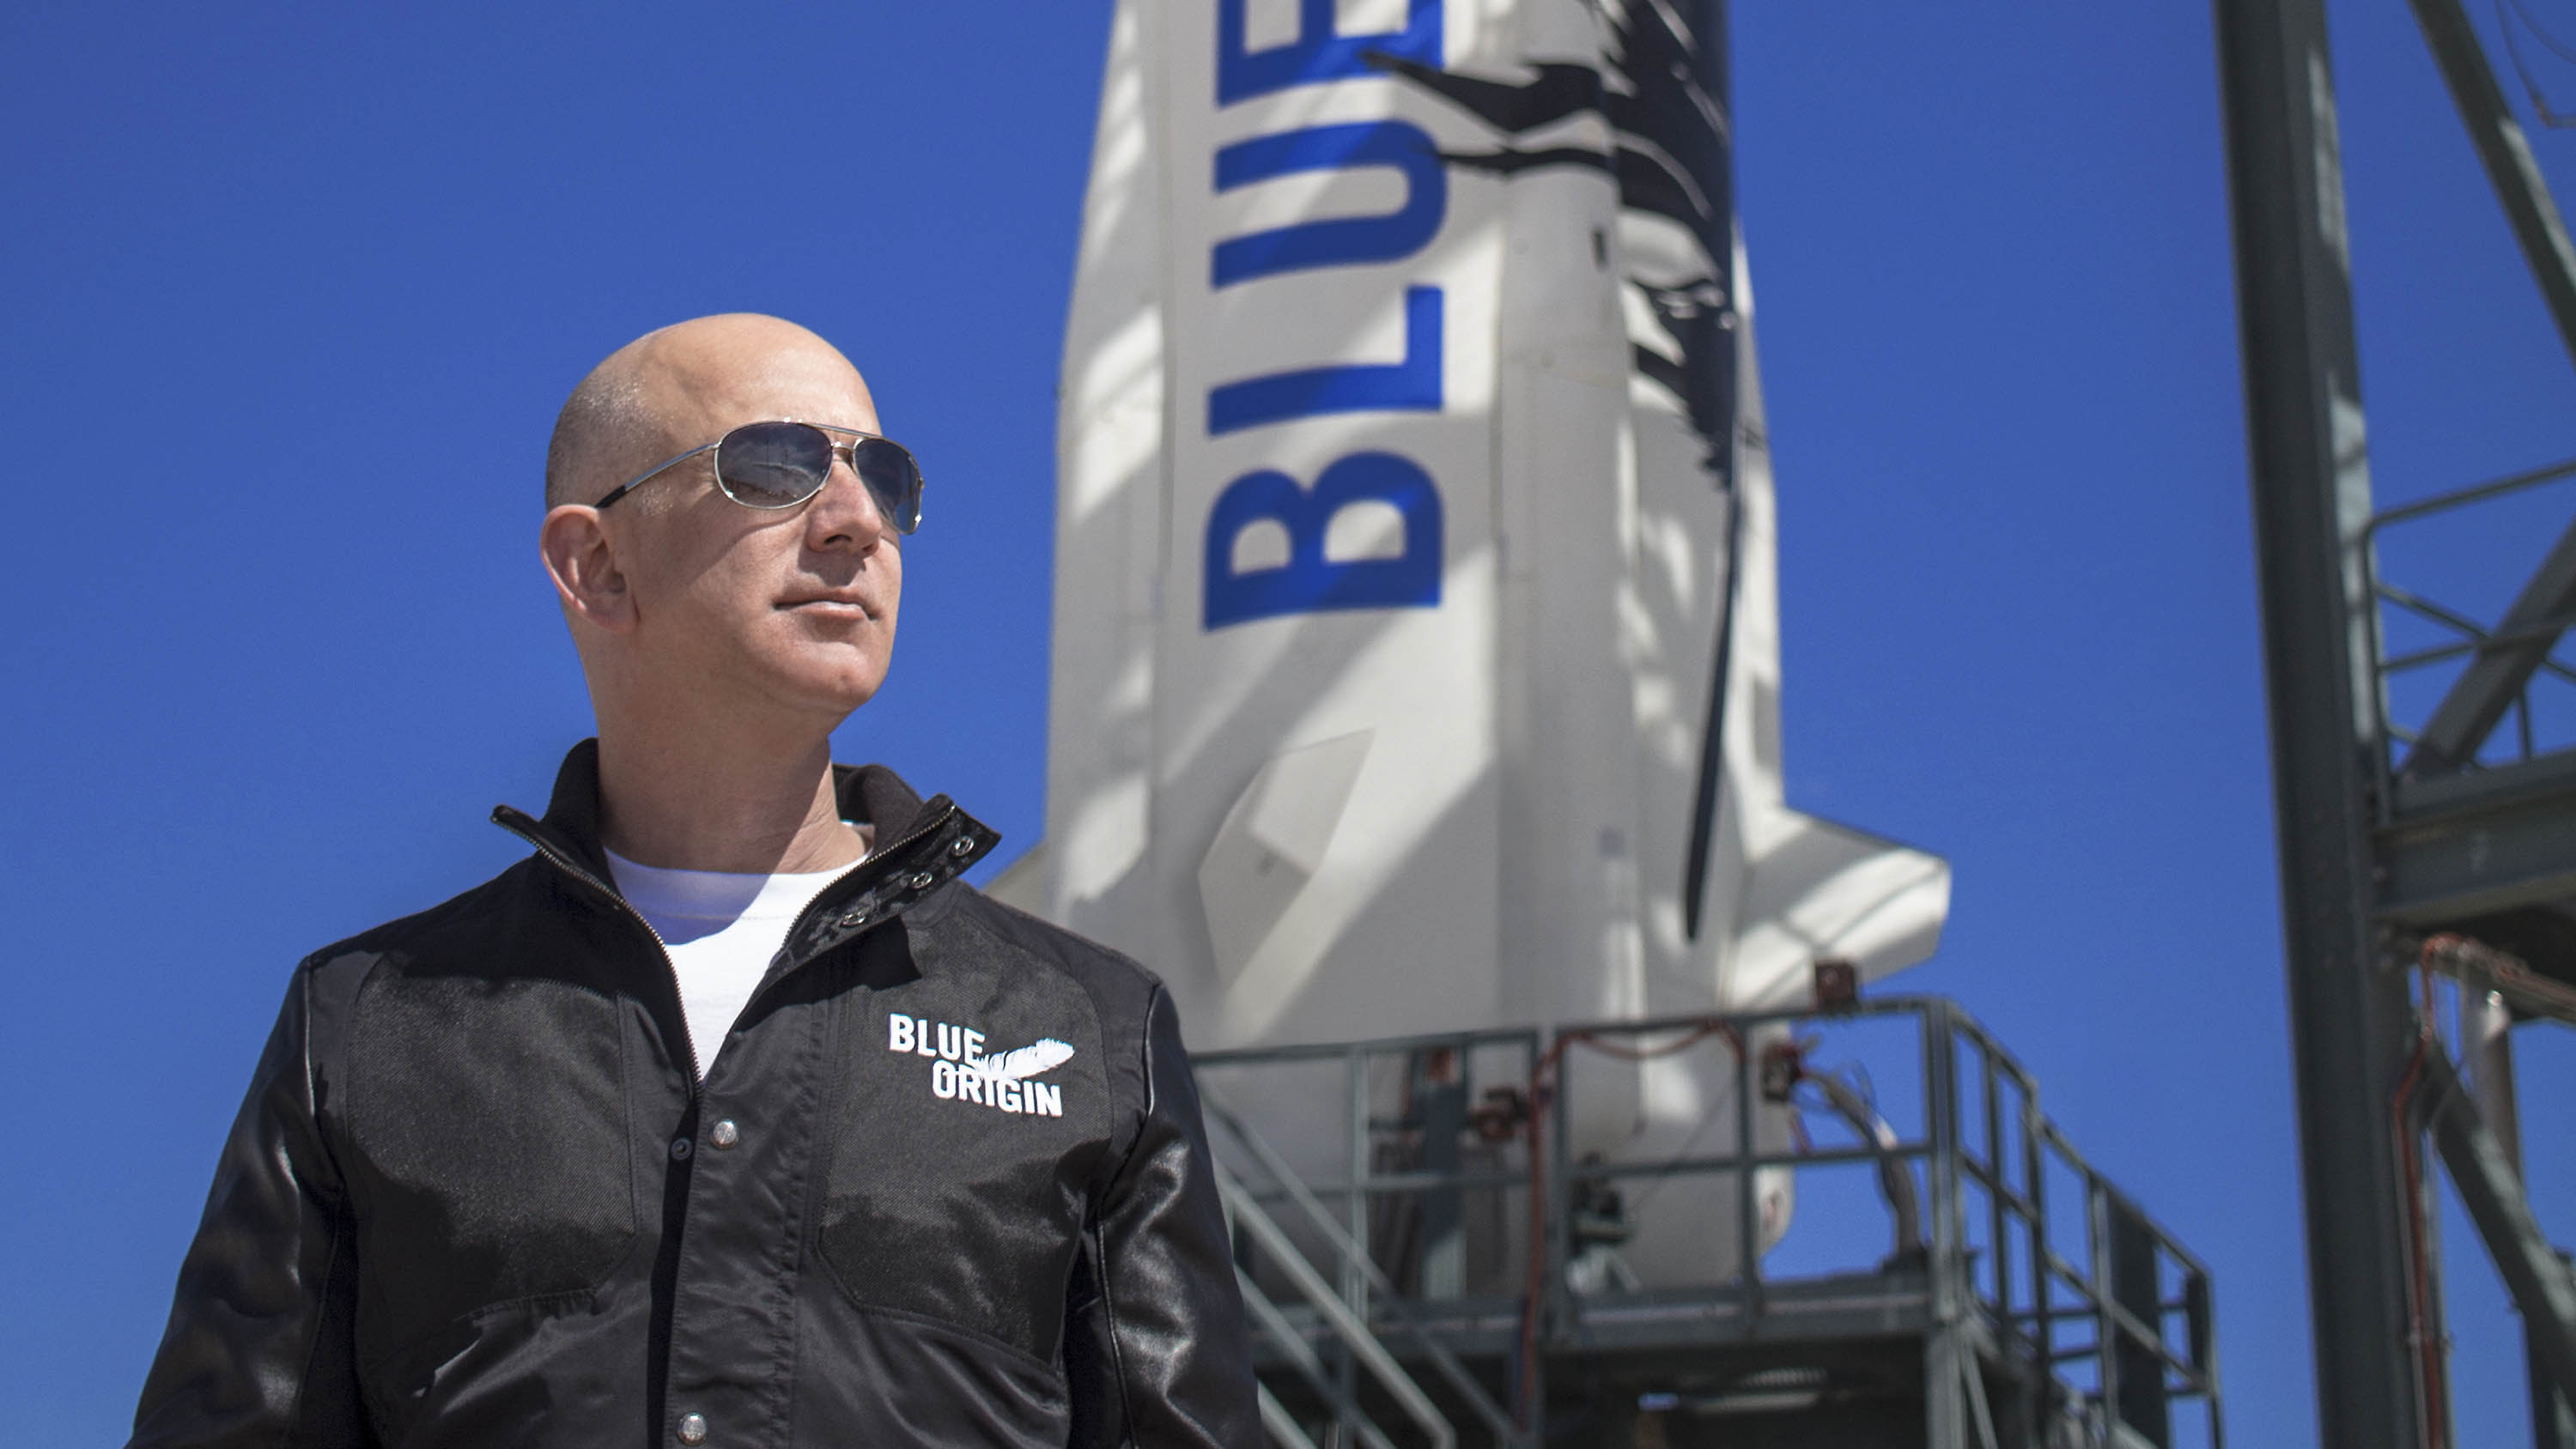 A Lifelong Dream And 20 Years Of Work How Blue Origin And Jeff Bezos Arrived At Their 1st Astronaut Launch Space